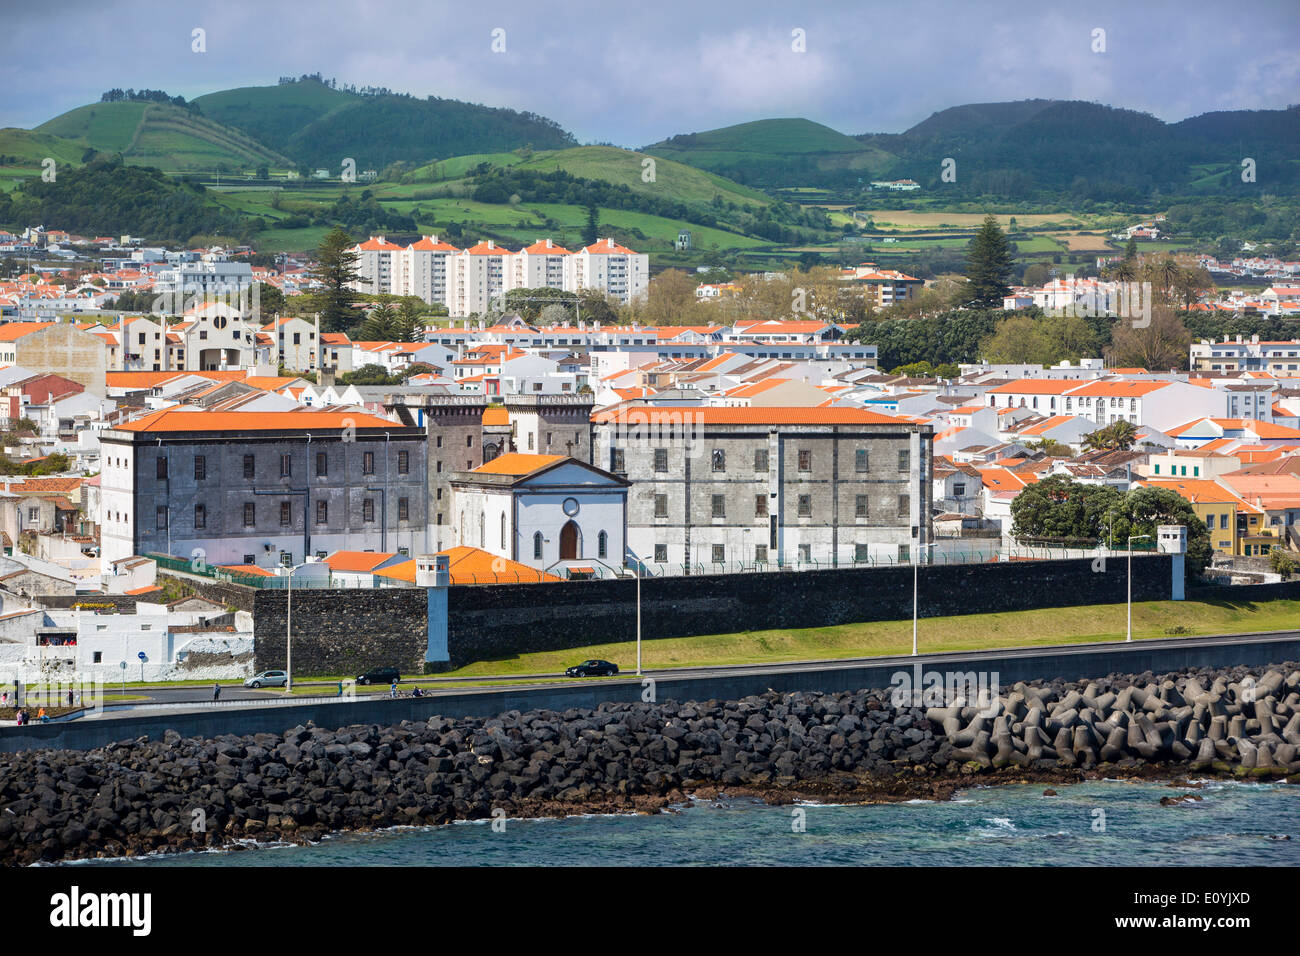 The prison and town of Ponta Delgada on Sao Miguel Island, Azores, Portugal Stock Photo